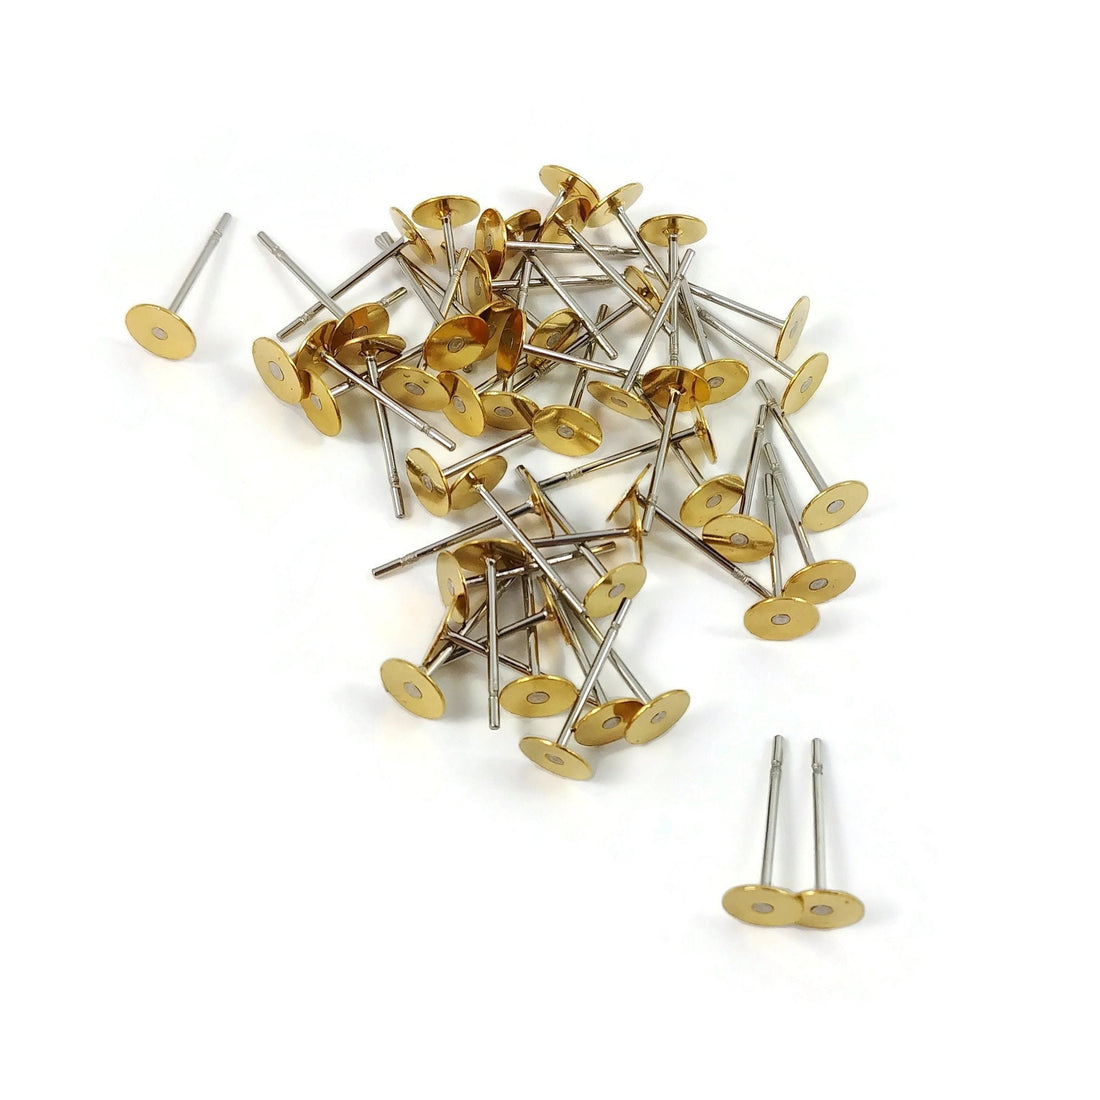 5mm earring stud posts, Stainless steel silver stud, Raw unplated brass gold pad, Nickel free jewelry fingings